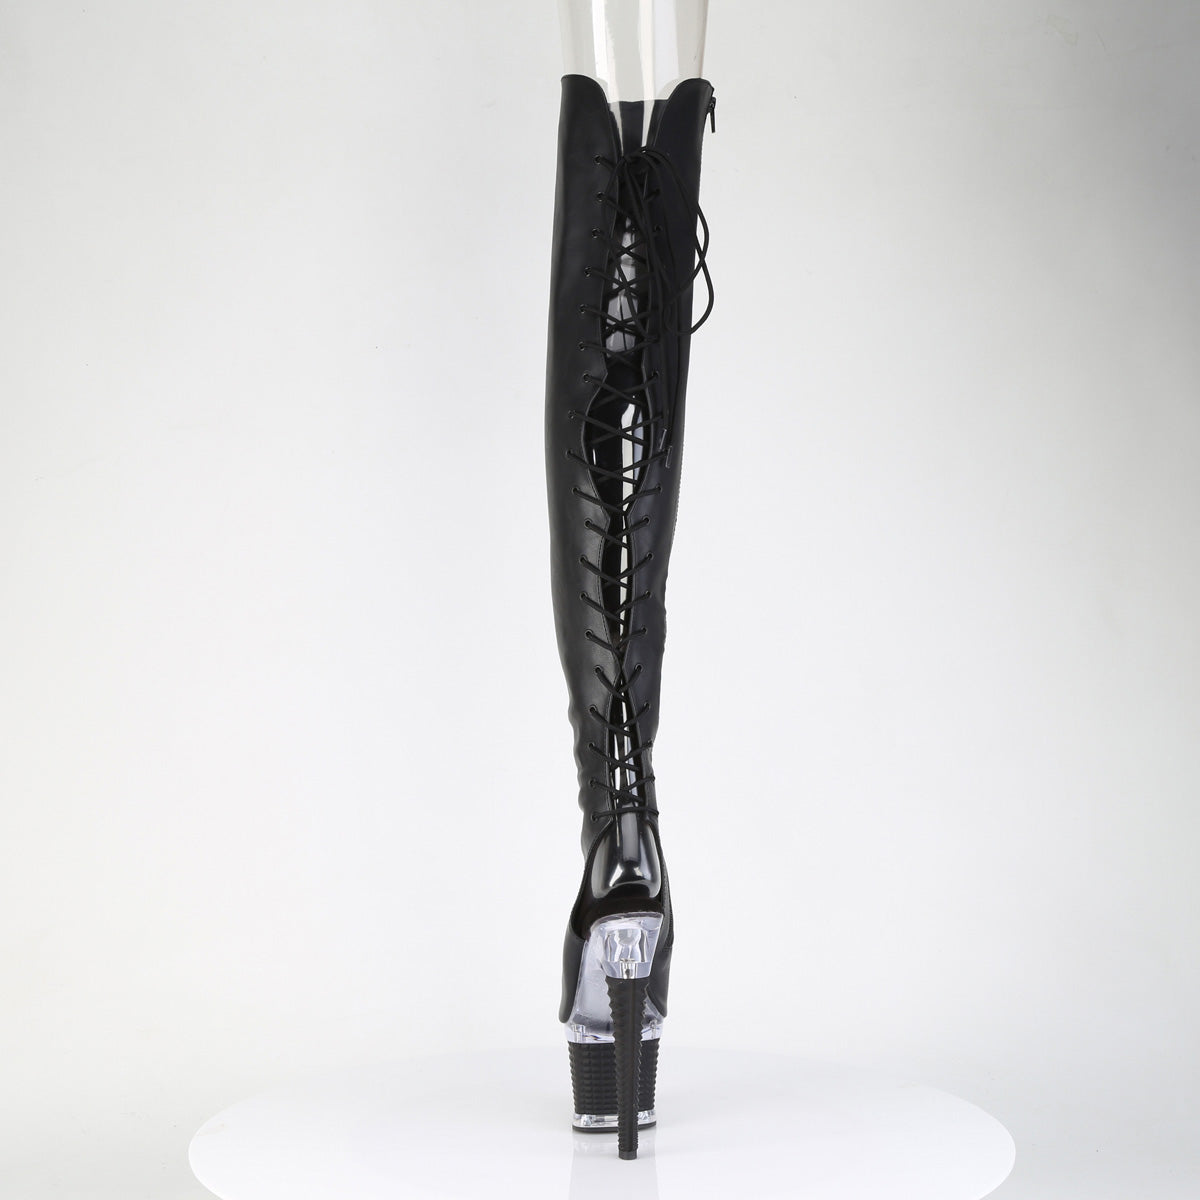 SPECTATOR-3030 Black Pleaser Pole Dancing Thigh High Boots with Peep Toes